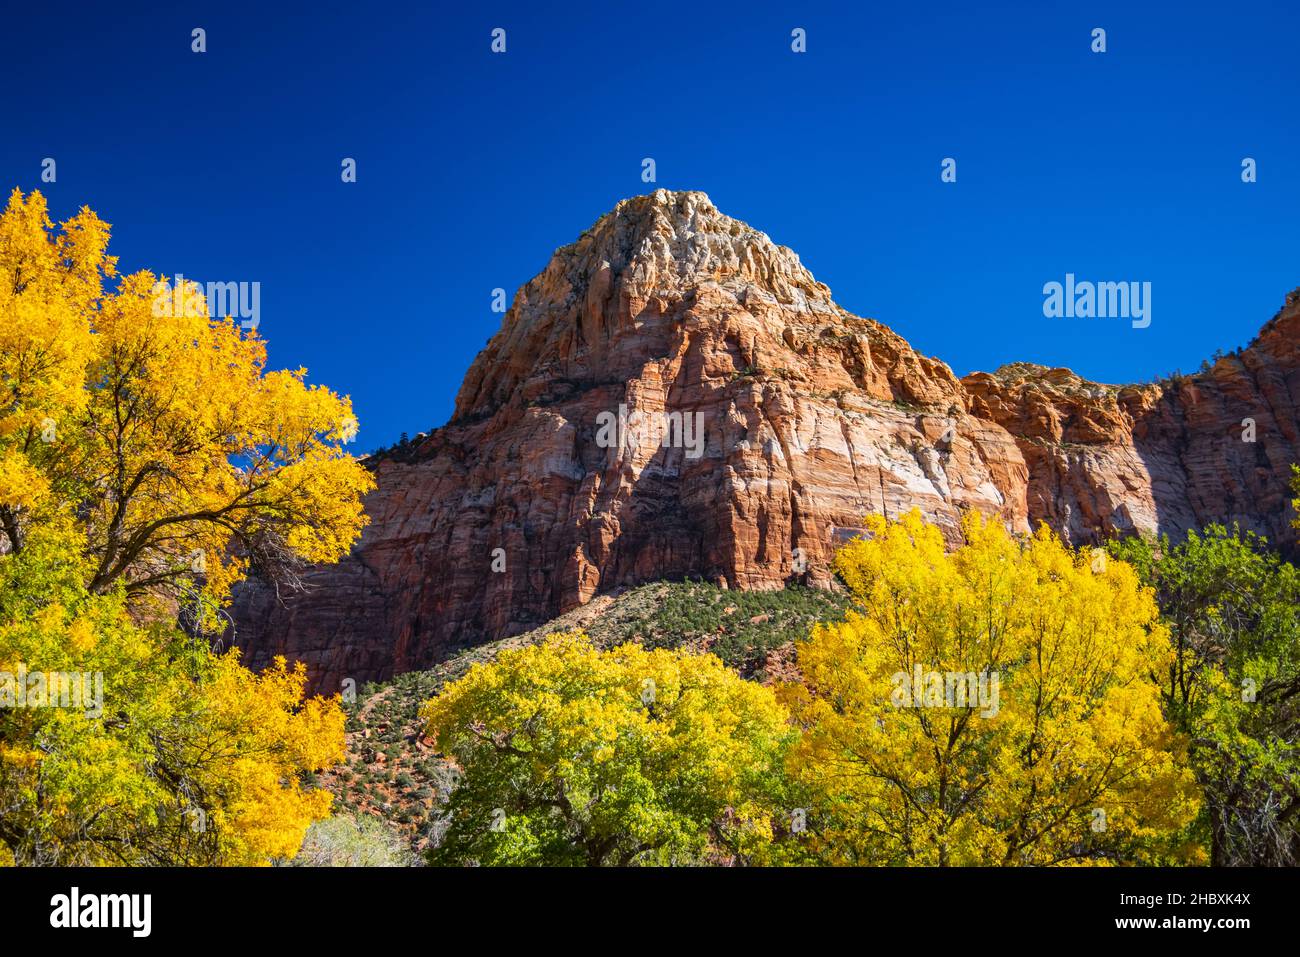 The is a view of the fall colors and Bridge Mountain in Zion National Park, Springdale, Washington County, Utah, USA. Stock Photo